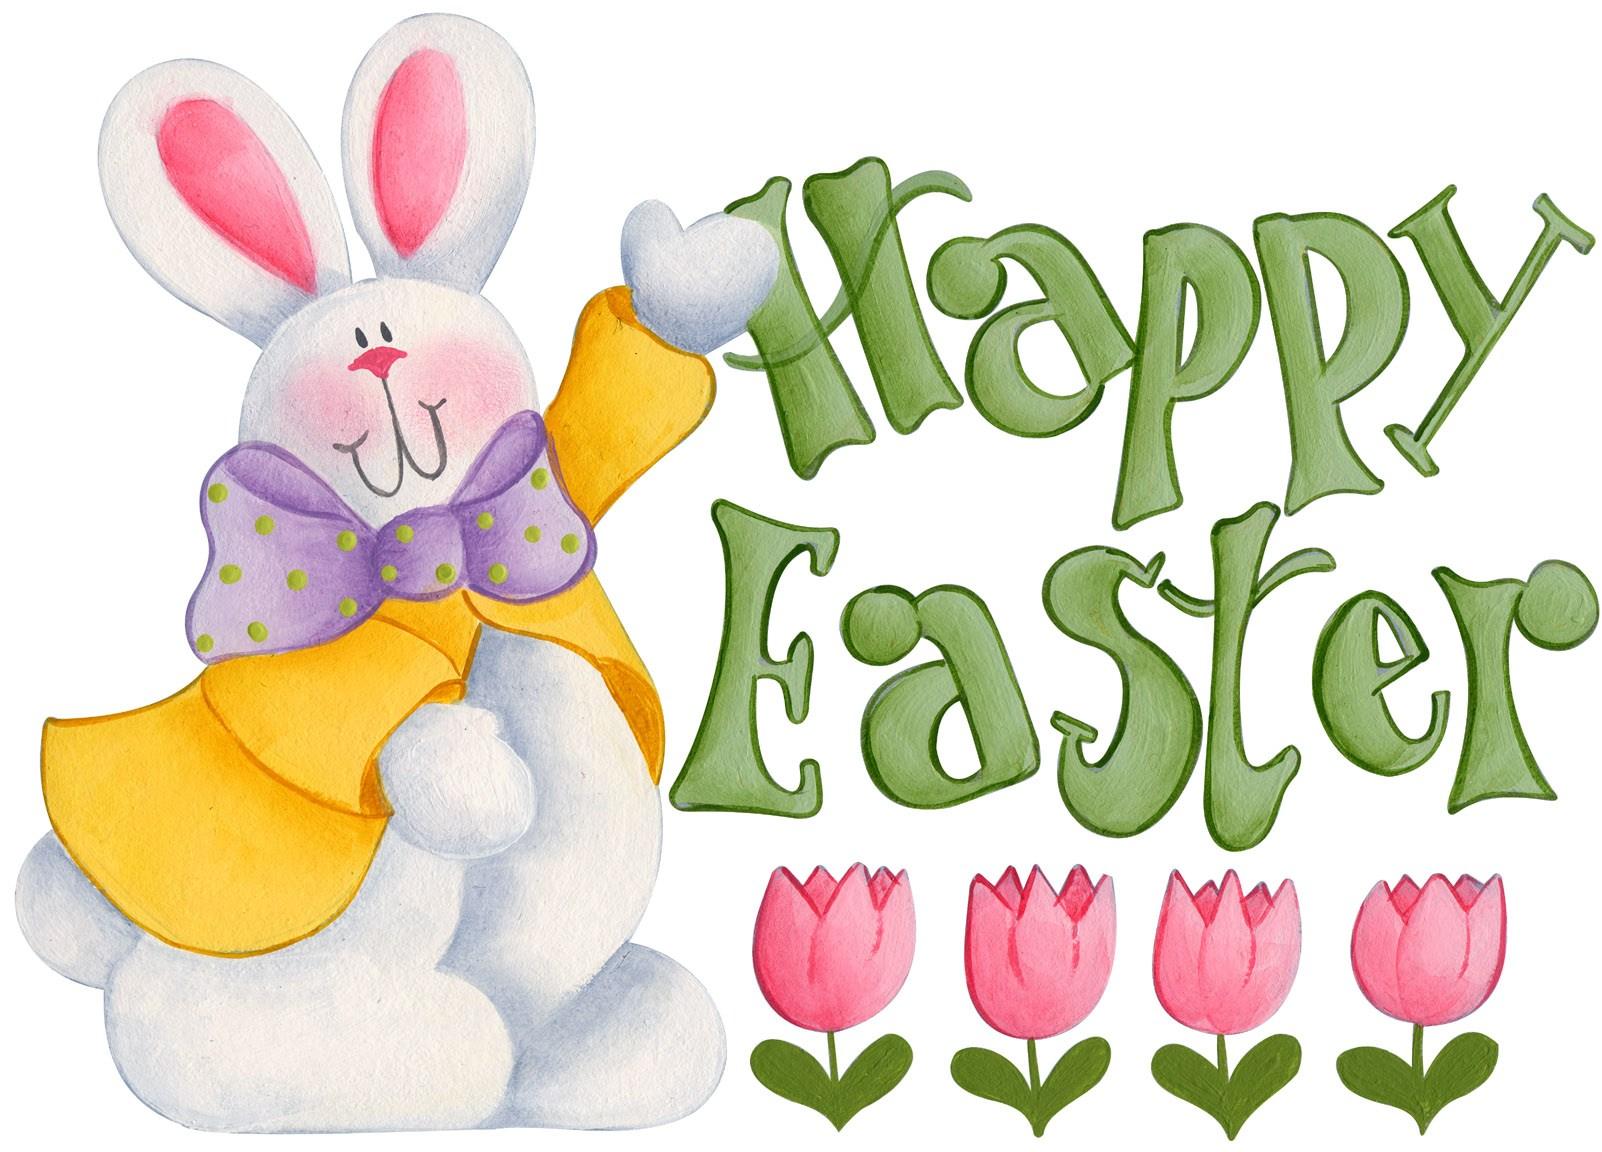 Happy Easter 2019 Image Picture HD Wallpaper And Photo Download